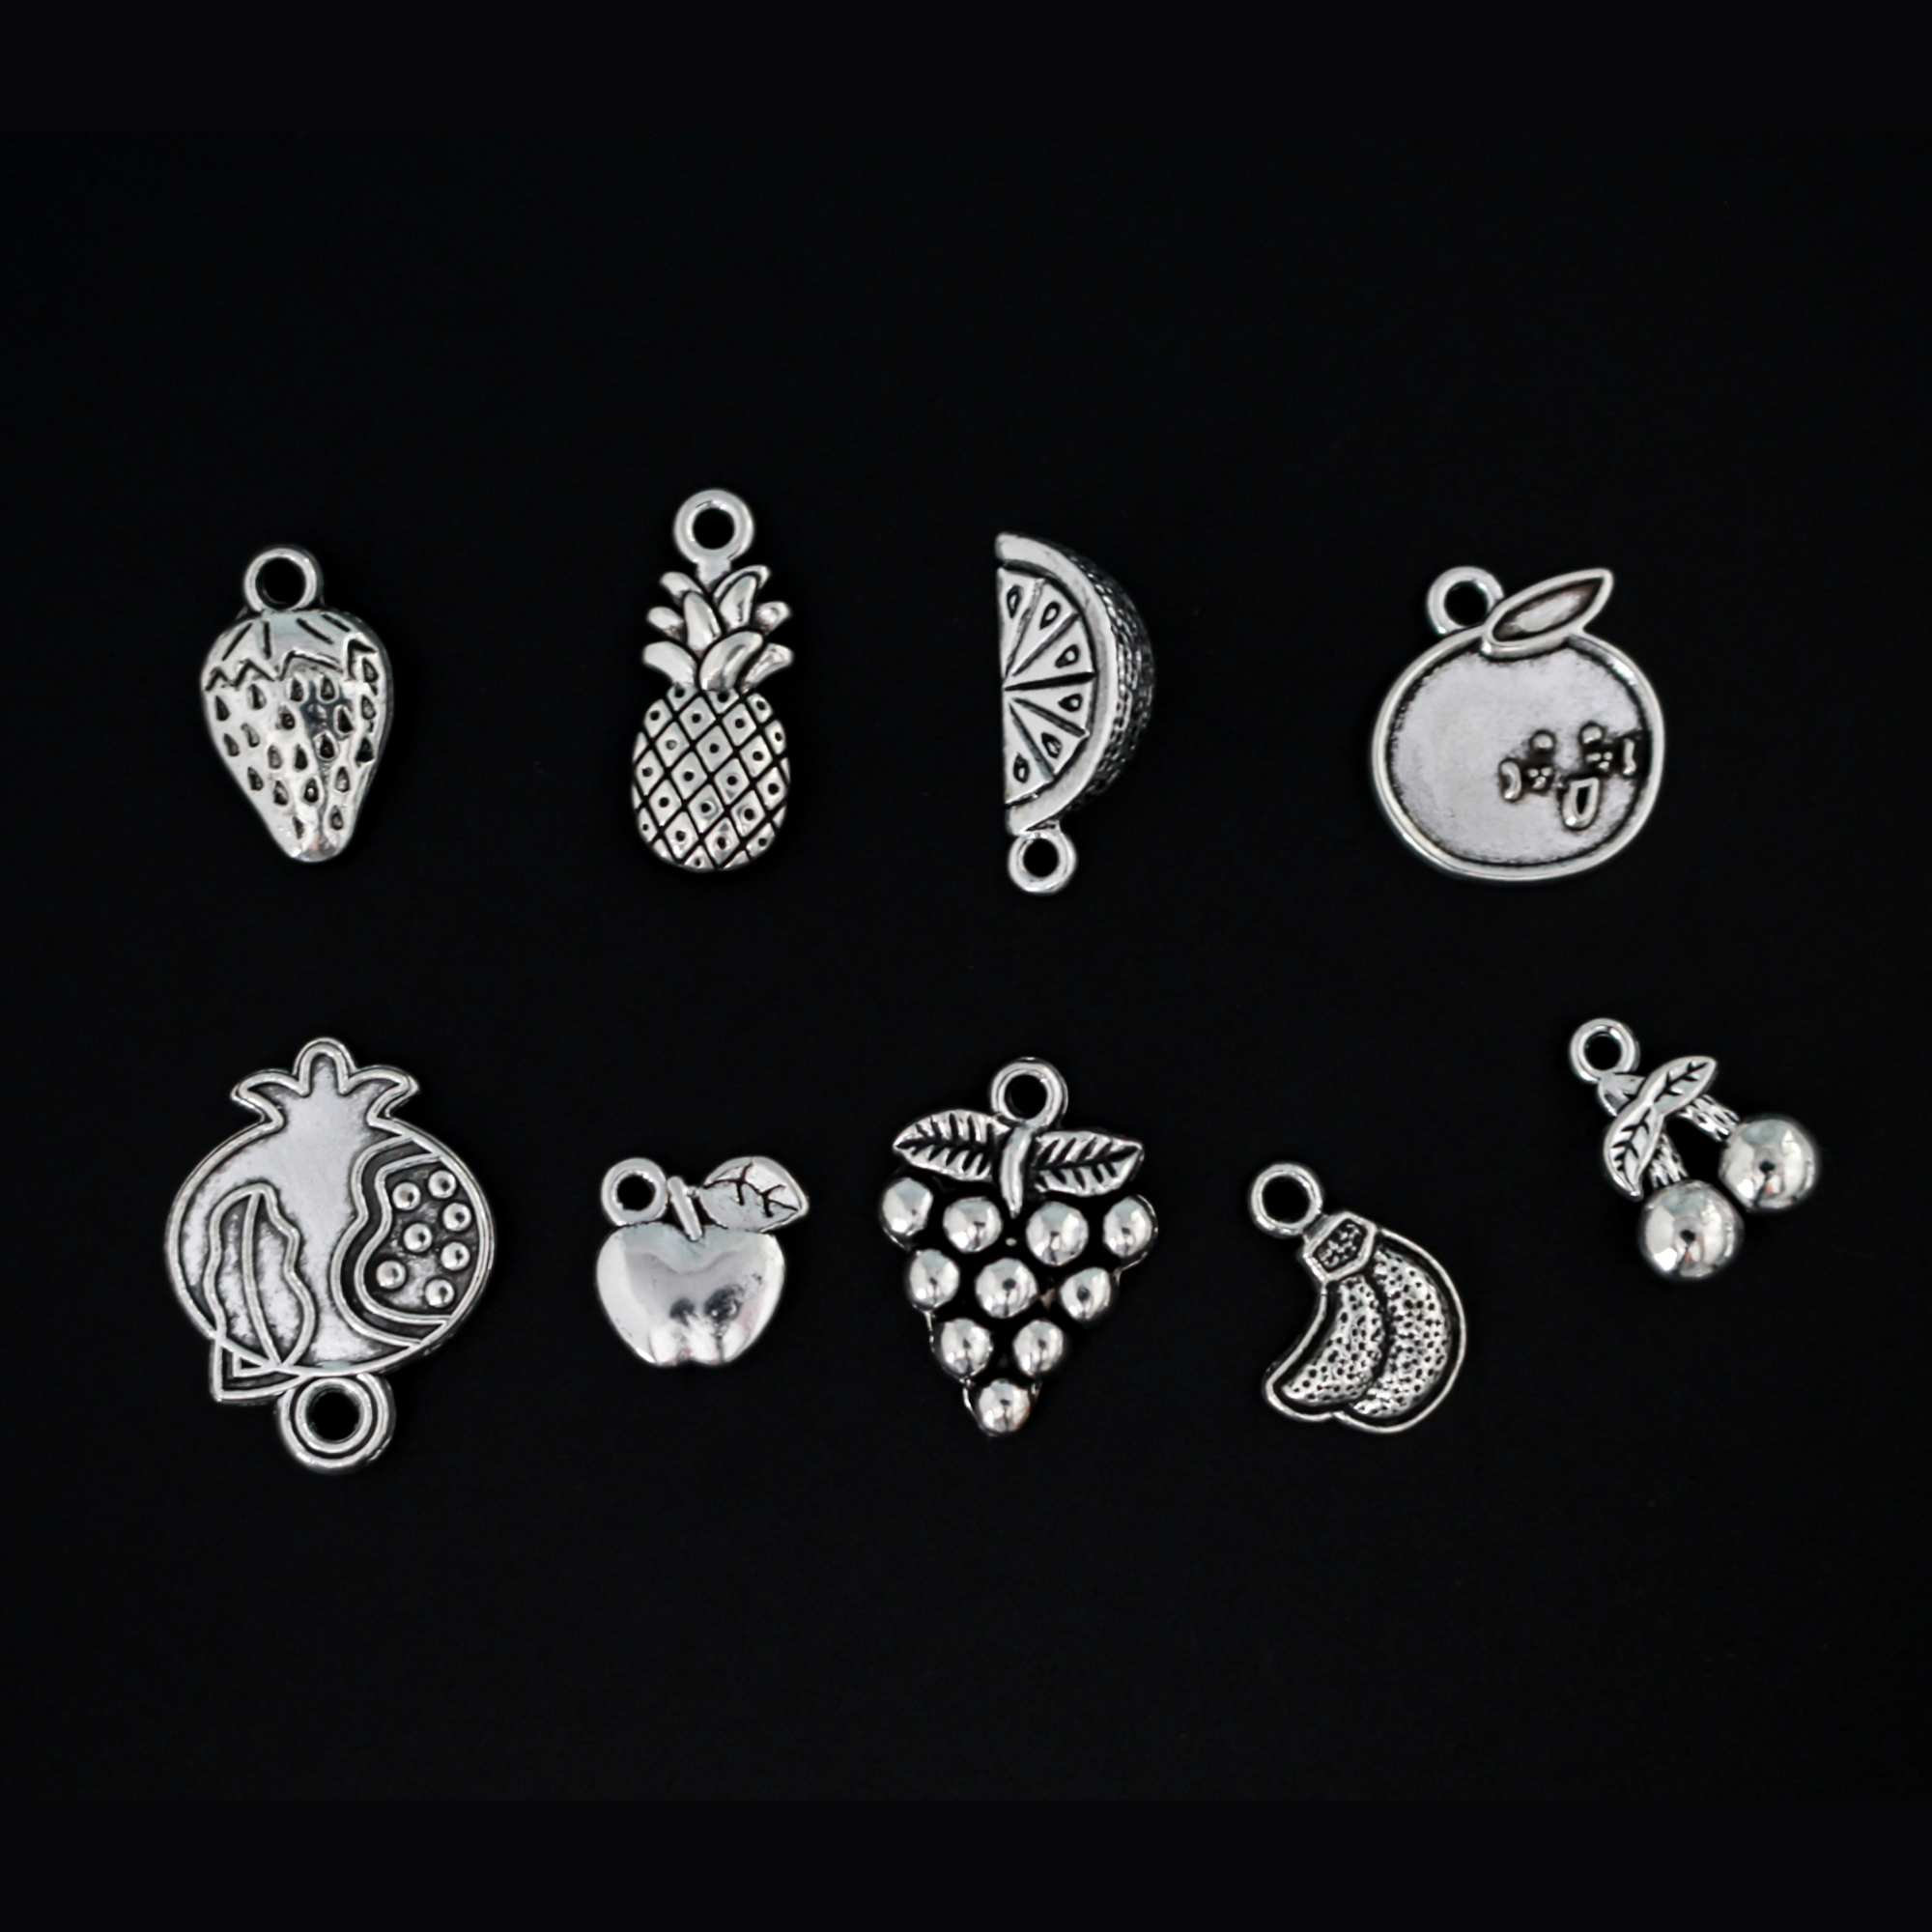 The Fruits of the Holy Spirit charm set. The set consists of 9 fruit charms that are Antiqued silver tone in color